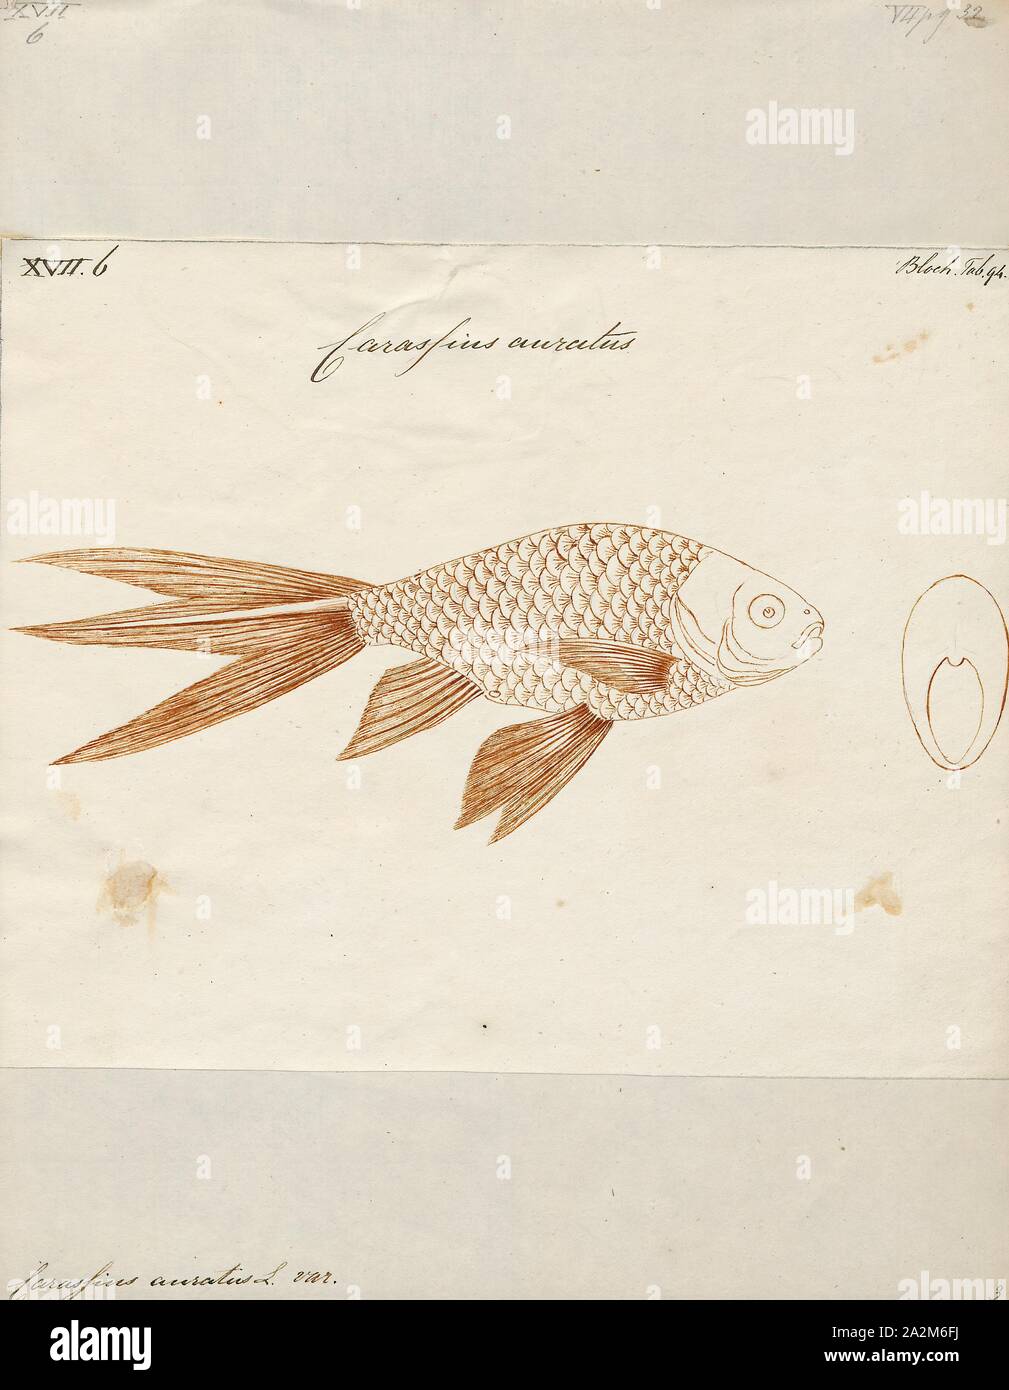 Carassius auratus, Print, The goldfish (Carassius auratus) is a freshwater fish in the family Cyprinidae of order Cypriniformes. It is one of the most commonly kept aquarium fish., 1774-1804 Stock Photo